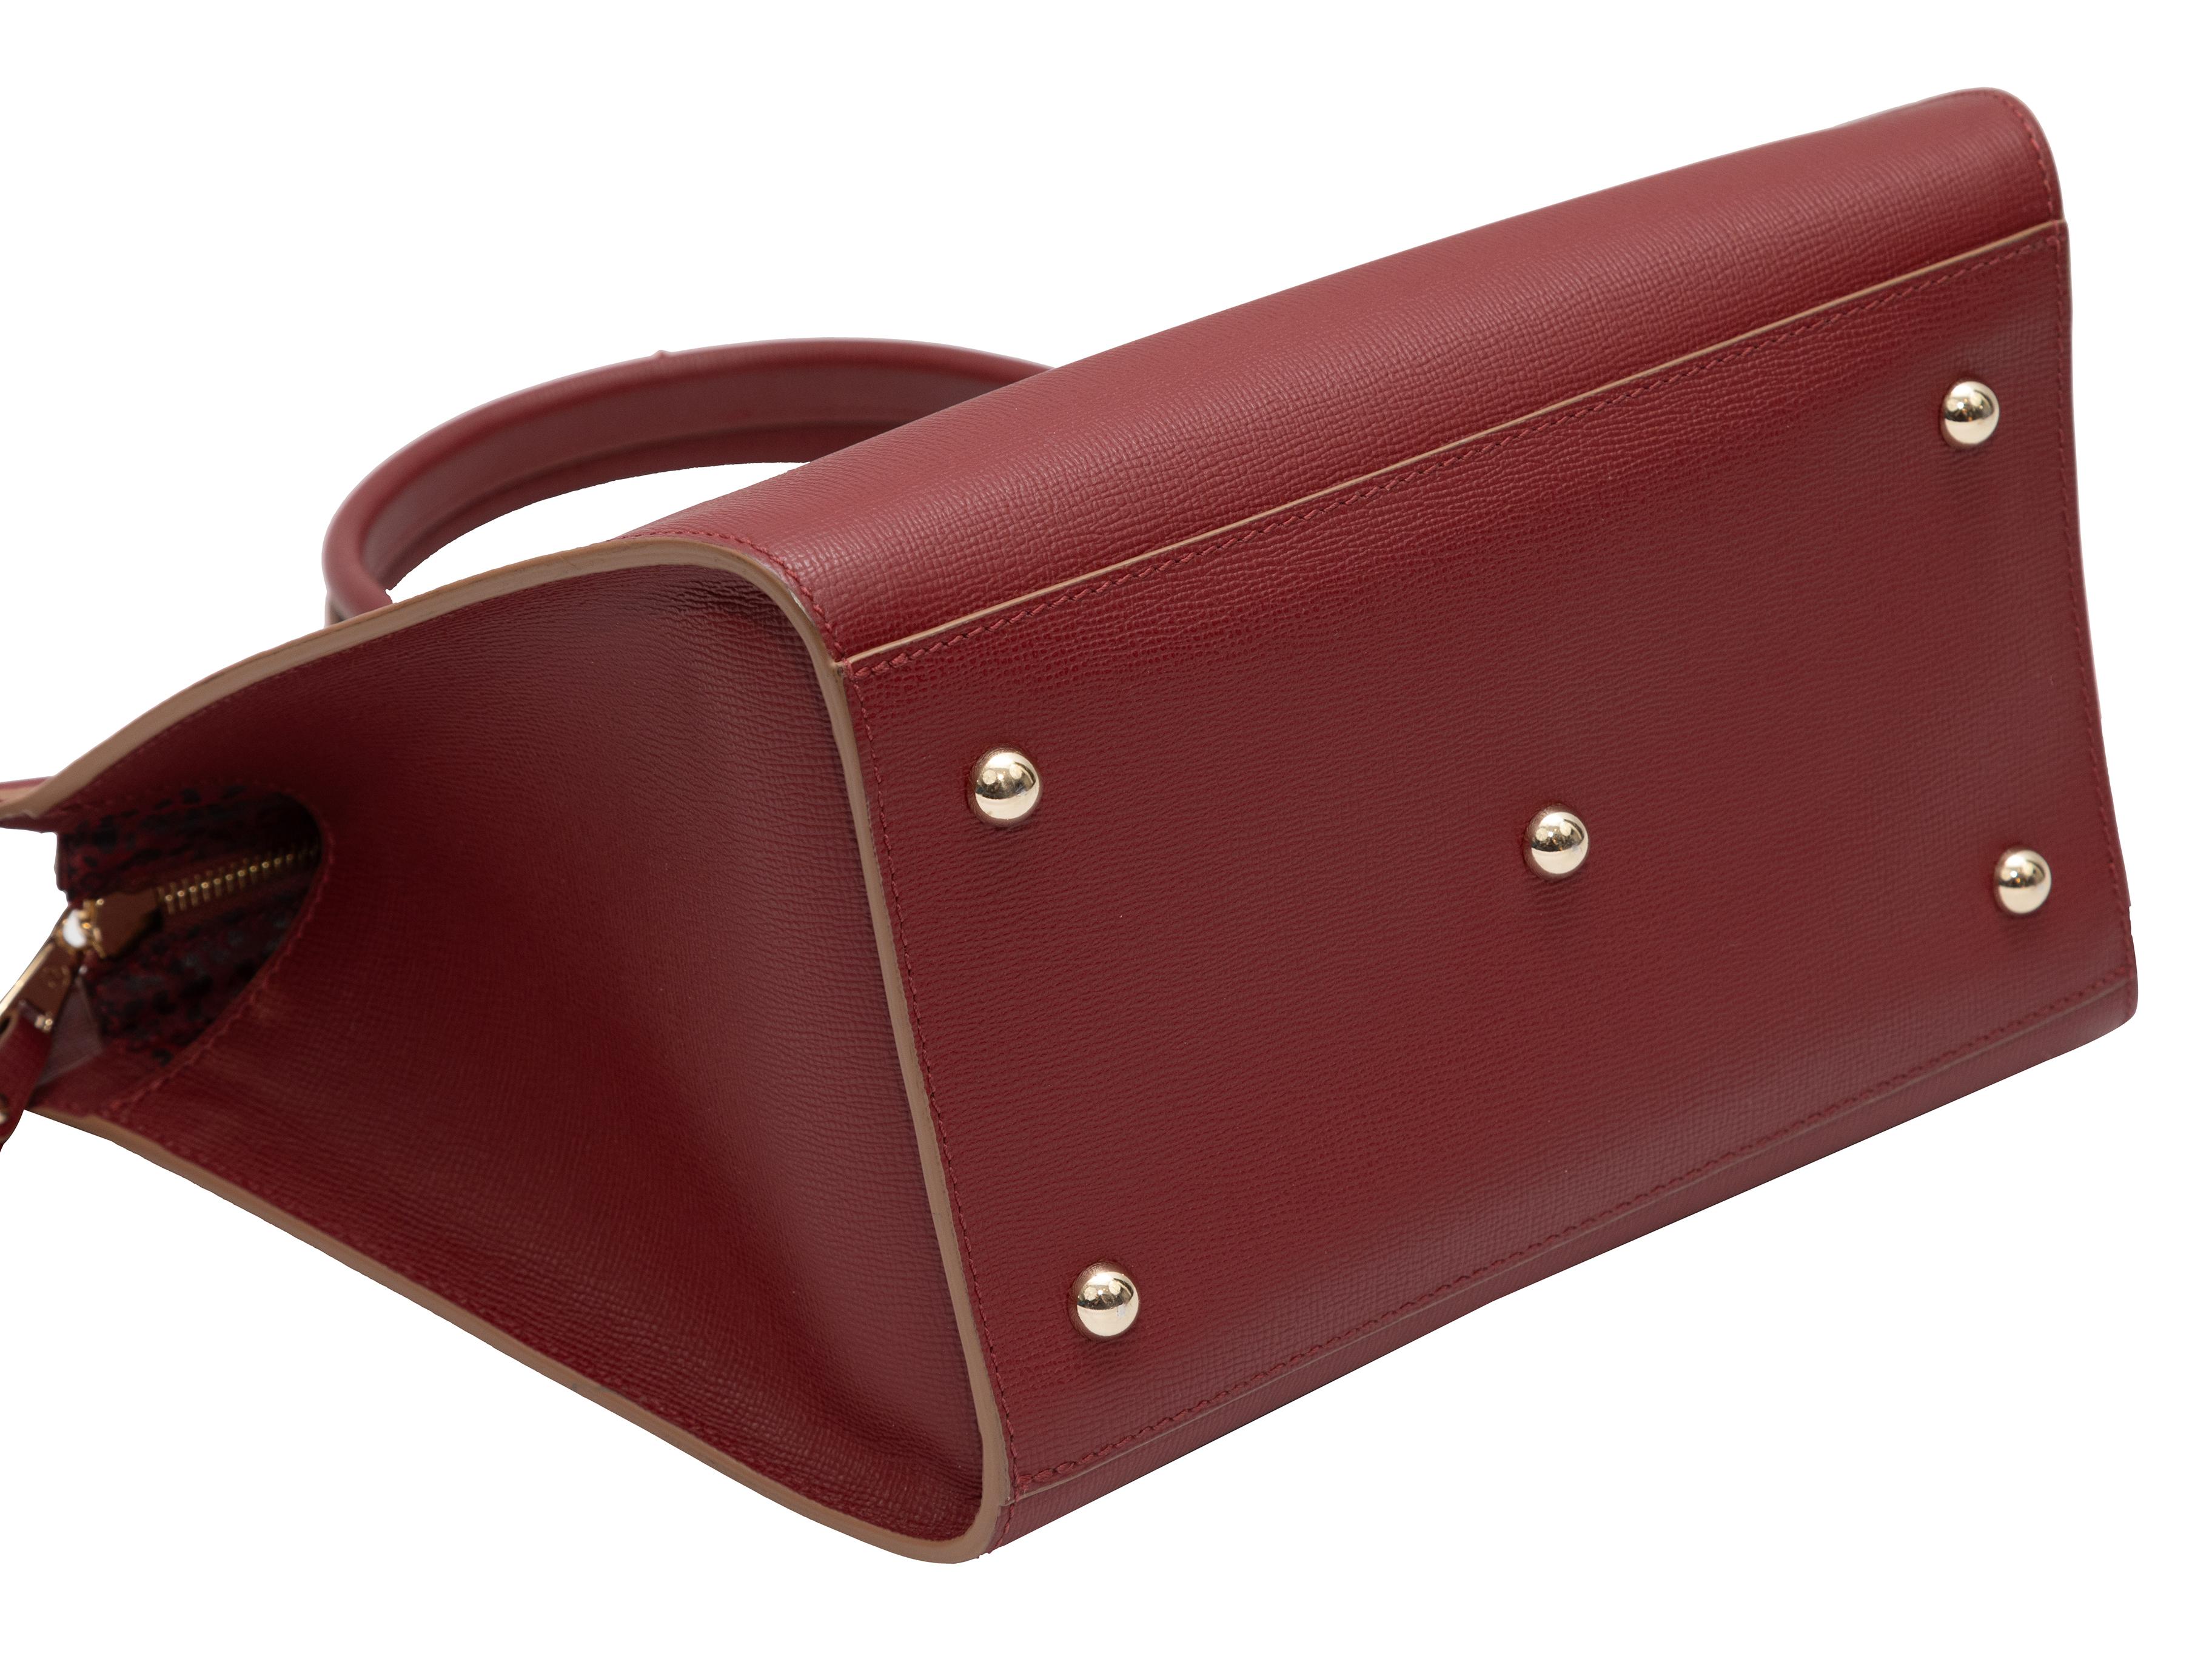 Burgundy Longchamp Le Pliage Leather Tote. The Le Pliage Tote features a leather body, gold-tone hardware, dual rolled top handles, an optional flat shoulder strap, and a top zip closure. 13